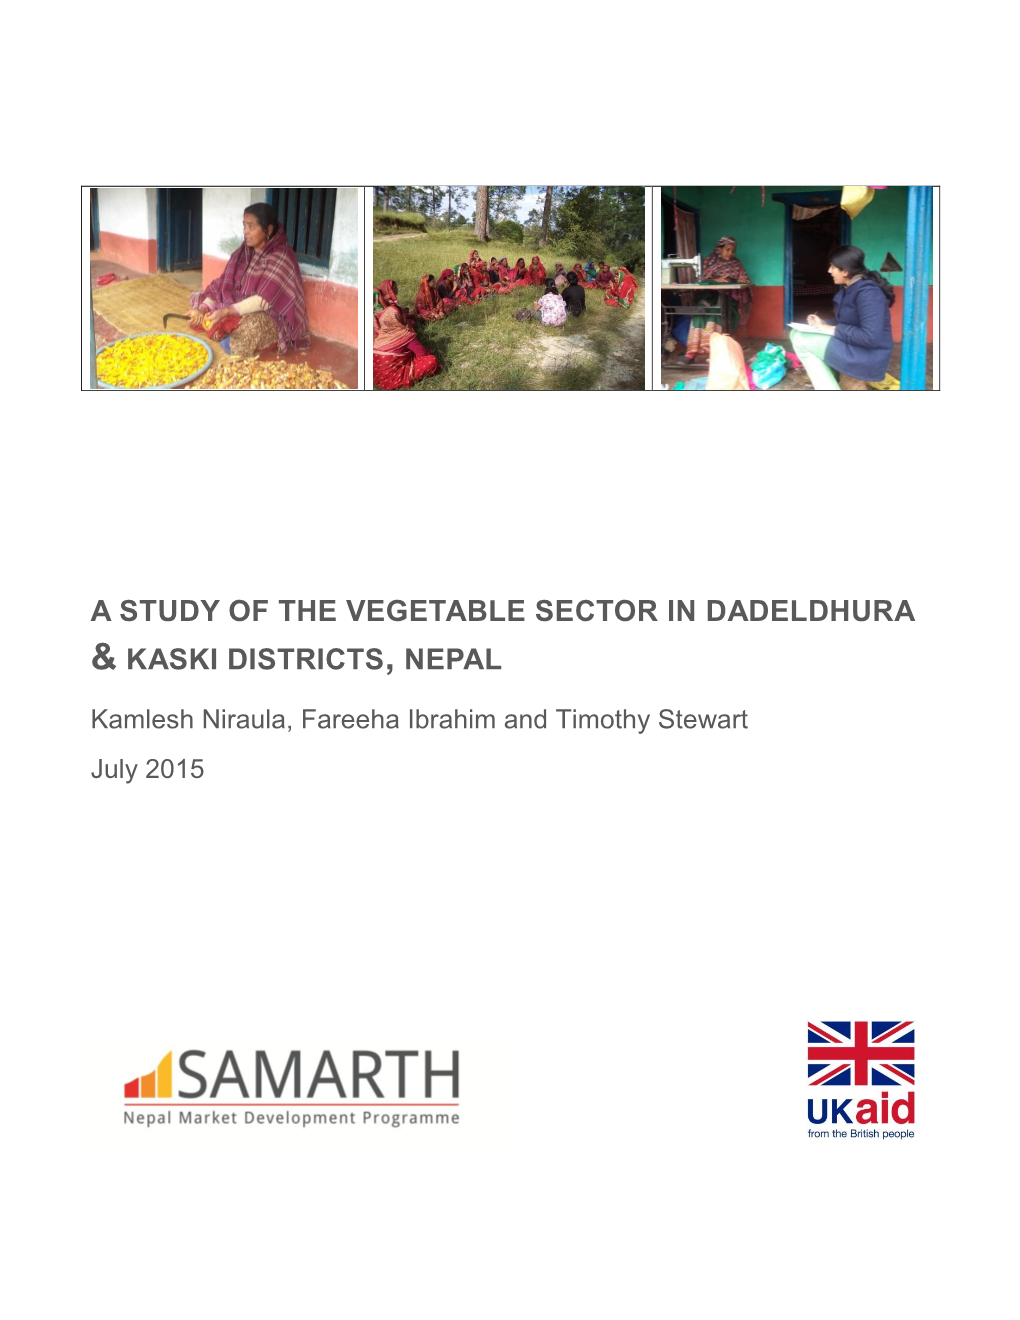 A Study of the Vegetable Sector in Dadeldhura & Kaski Districts, Nepal